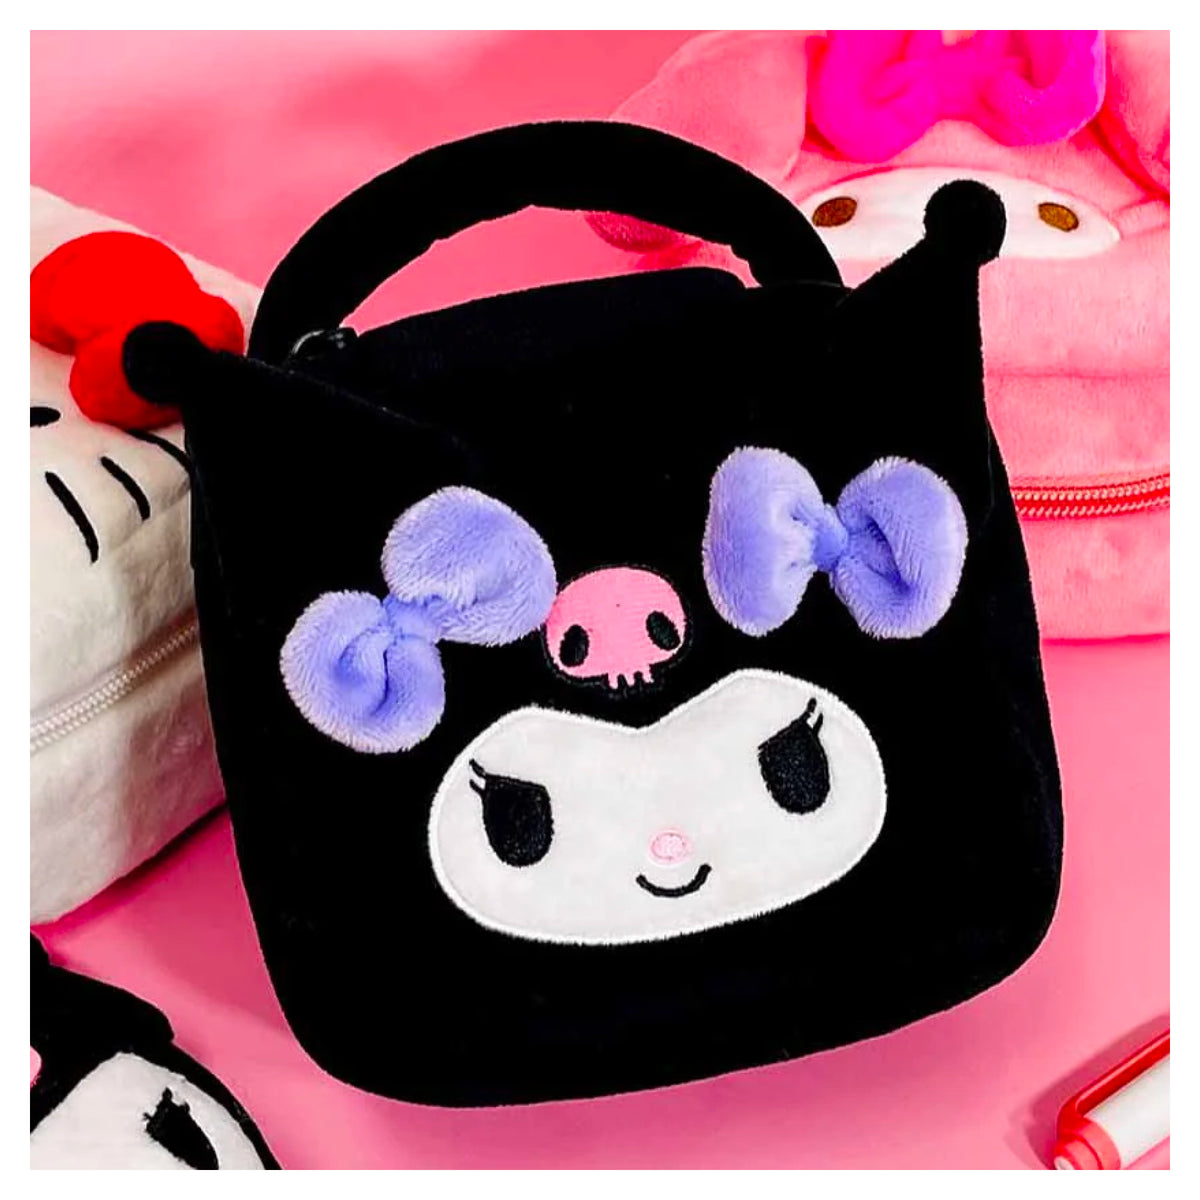 Kuromi Square Pouch